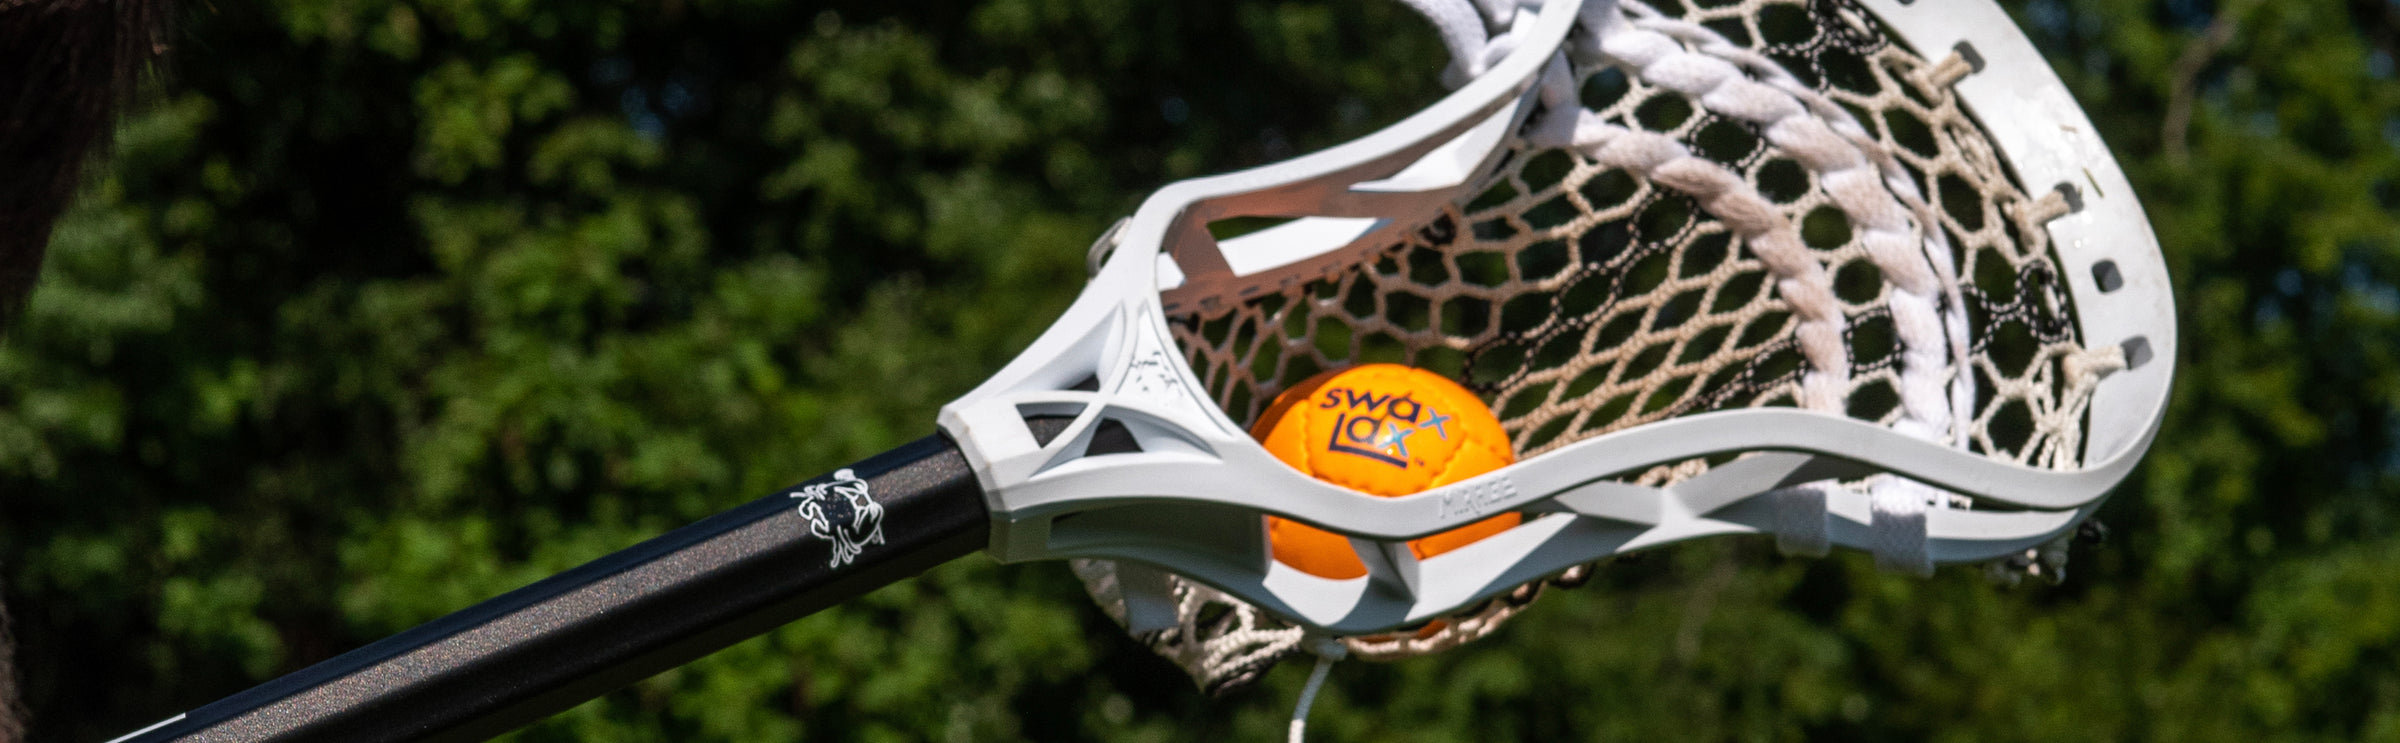 Swax Lax Lacrosse Practice Ball in Lacrosse Stick